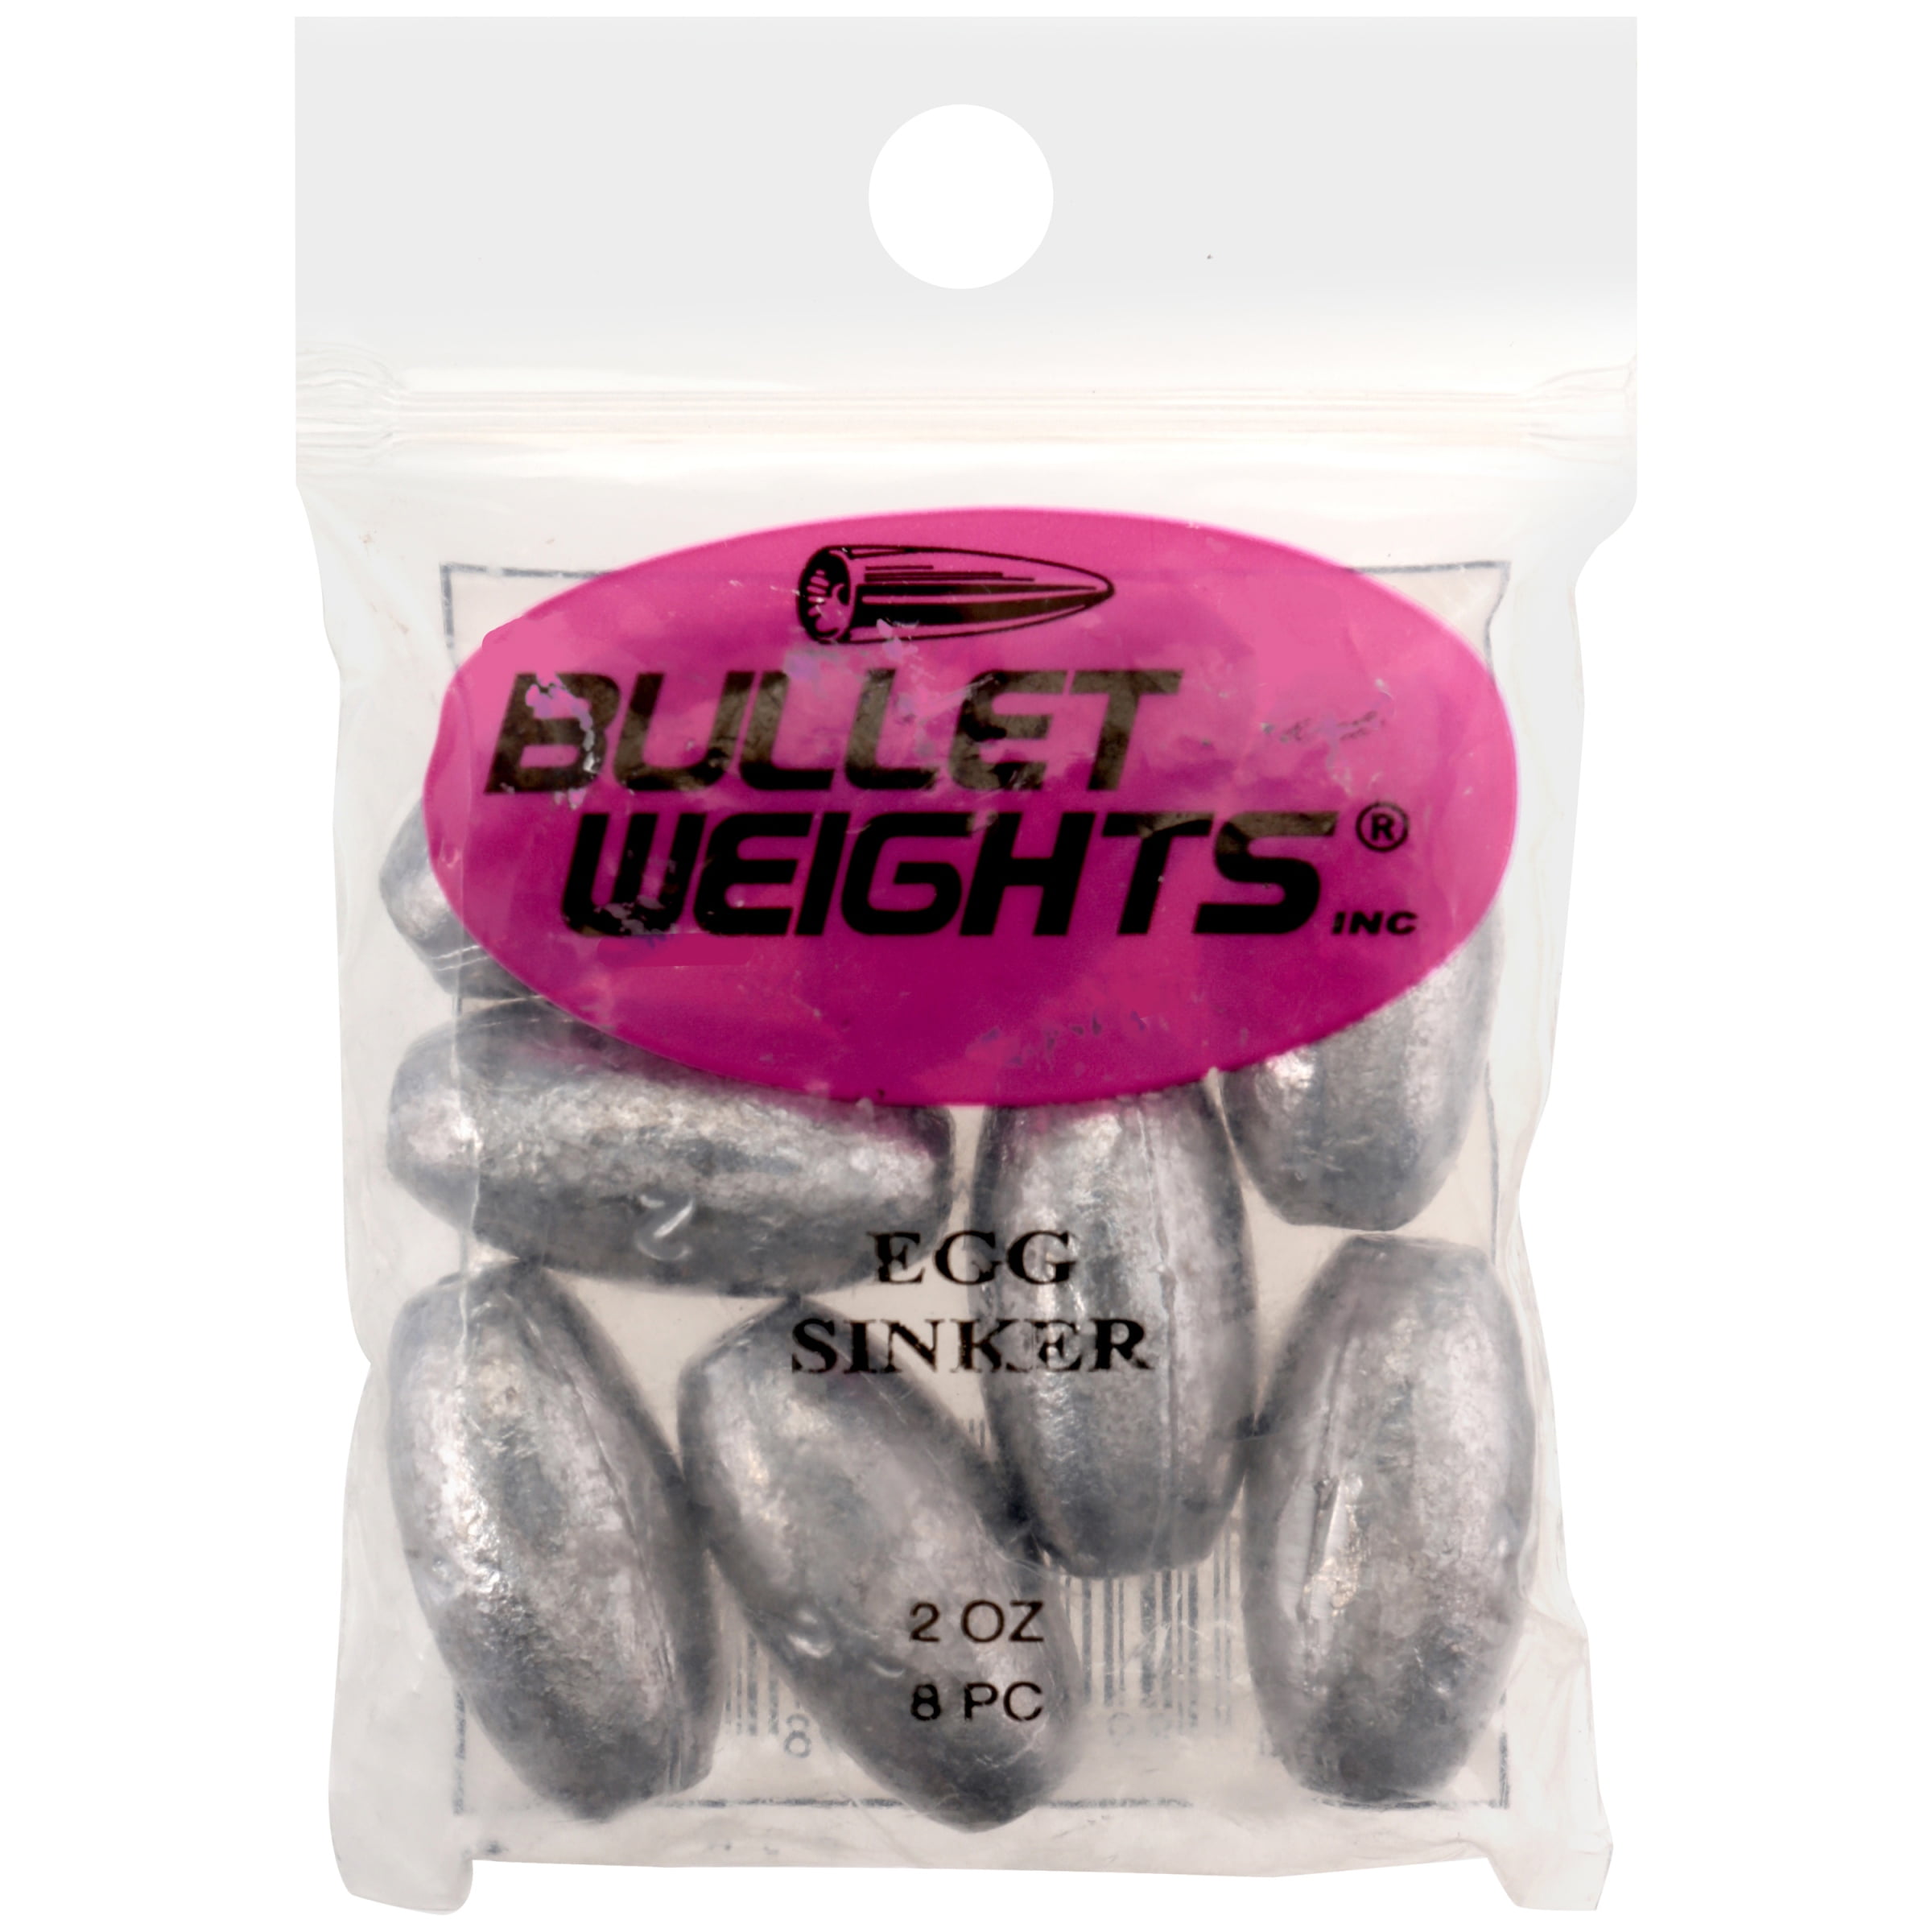 8 oz egg sinkers / weights - quantity of 3/6/12/25/50/100/250 - FREE  SHIPPING 